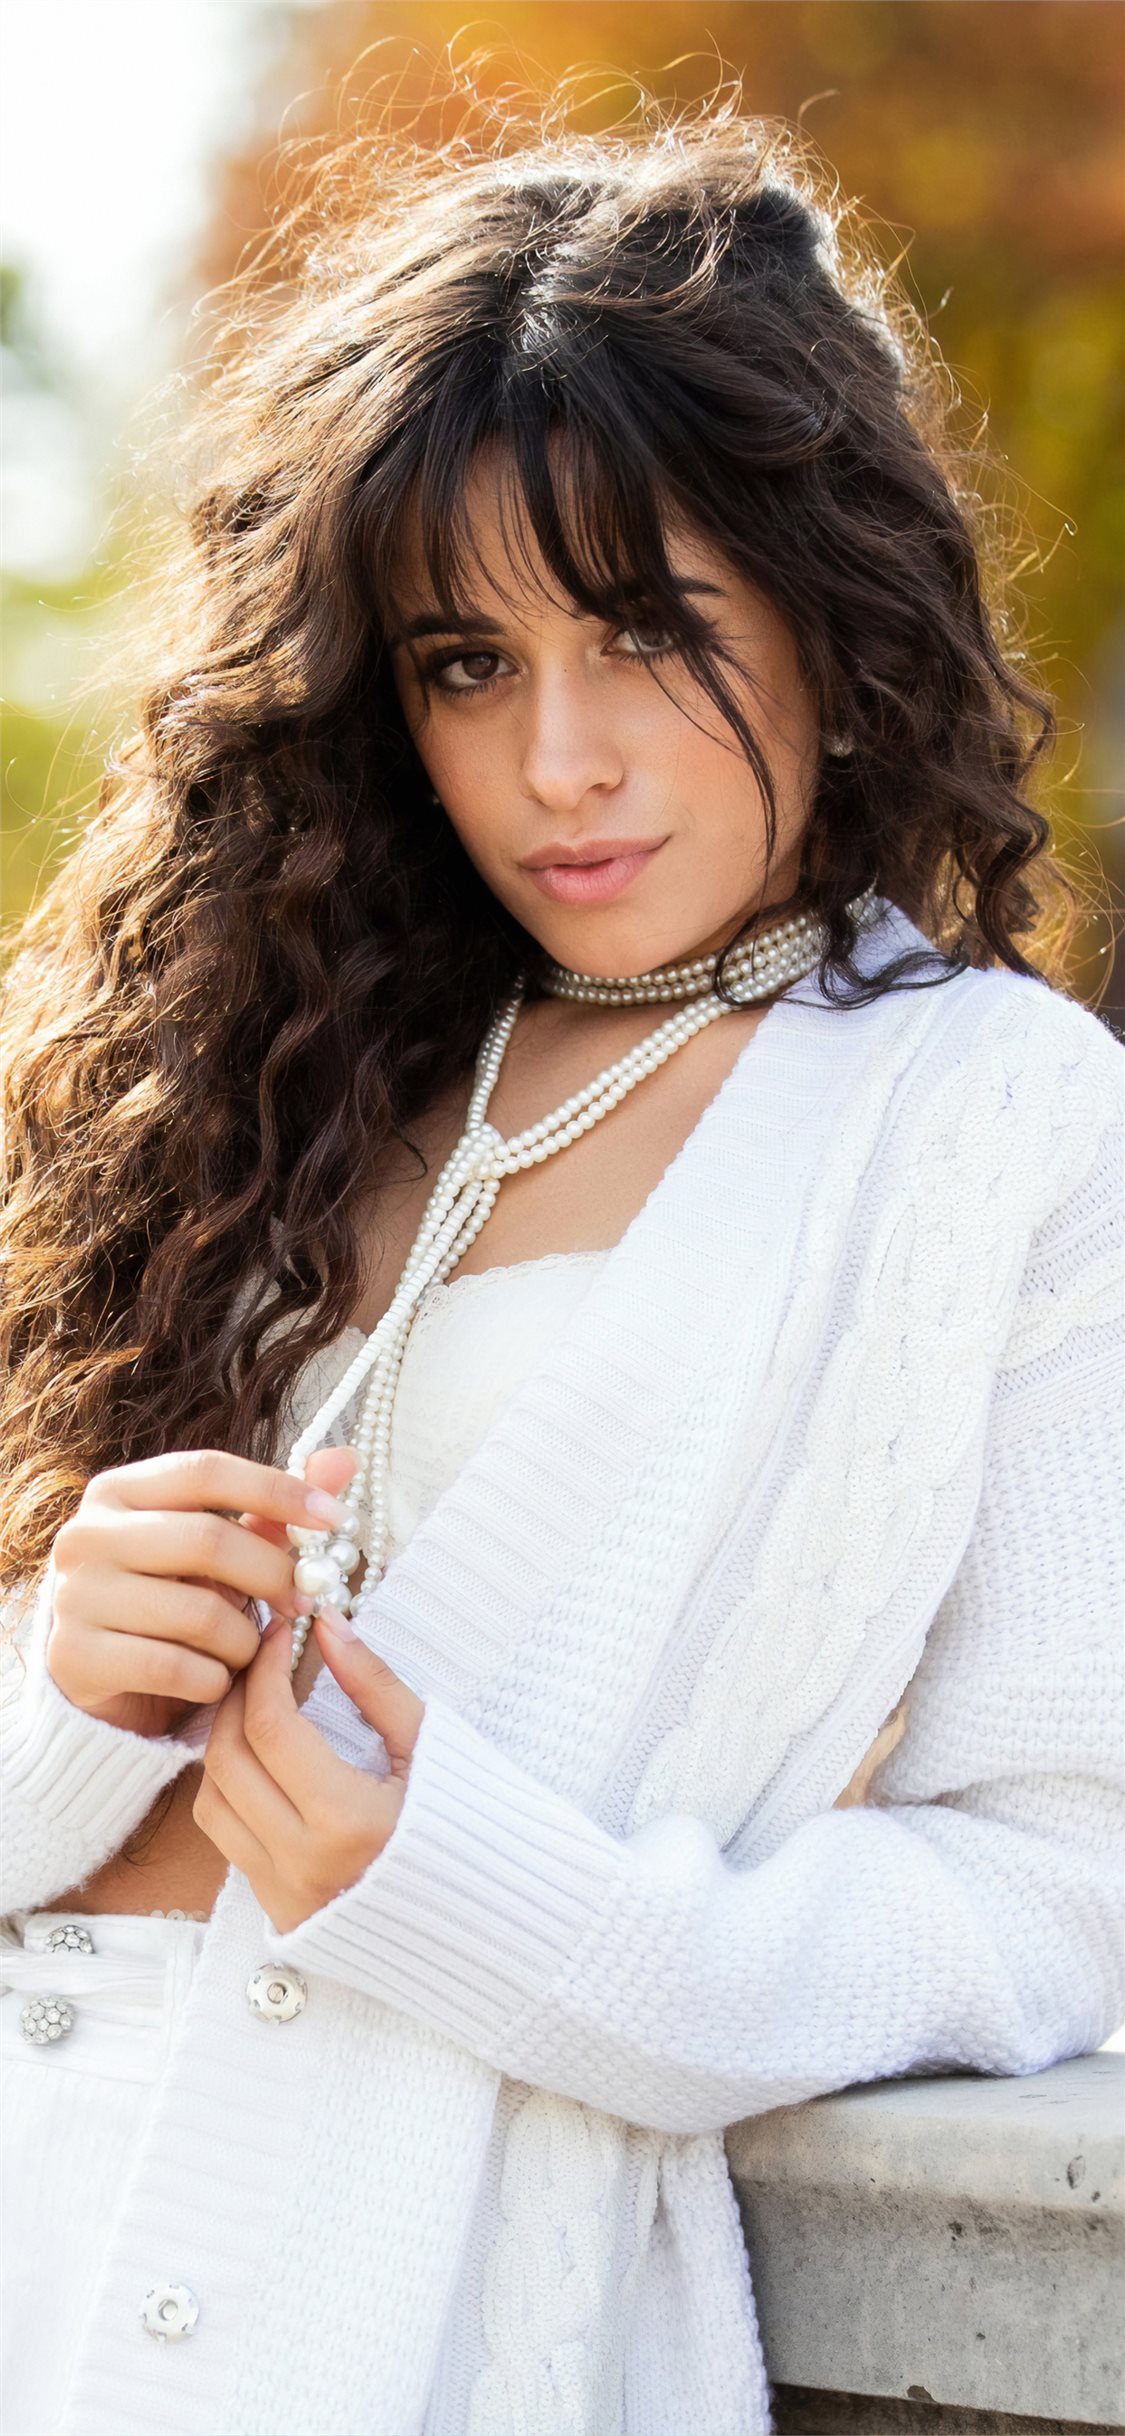 camila cabello singer 2019 iPhone 11 Wallpapers Free Download